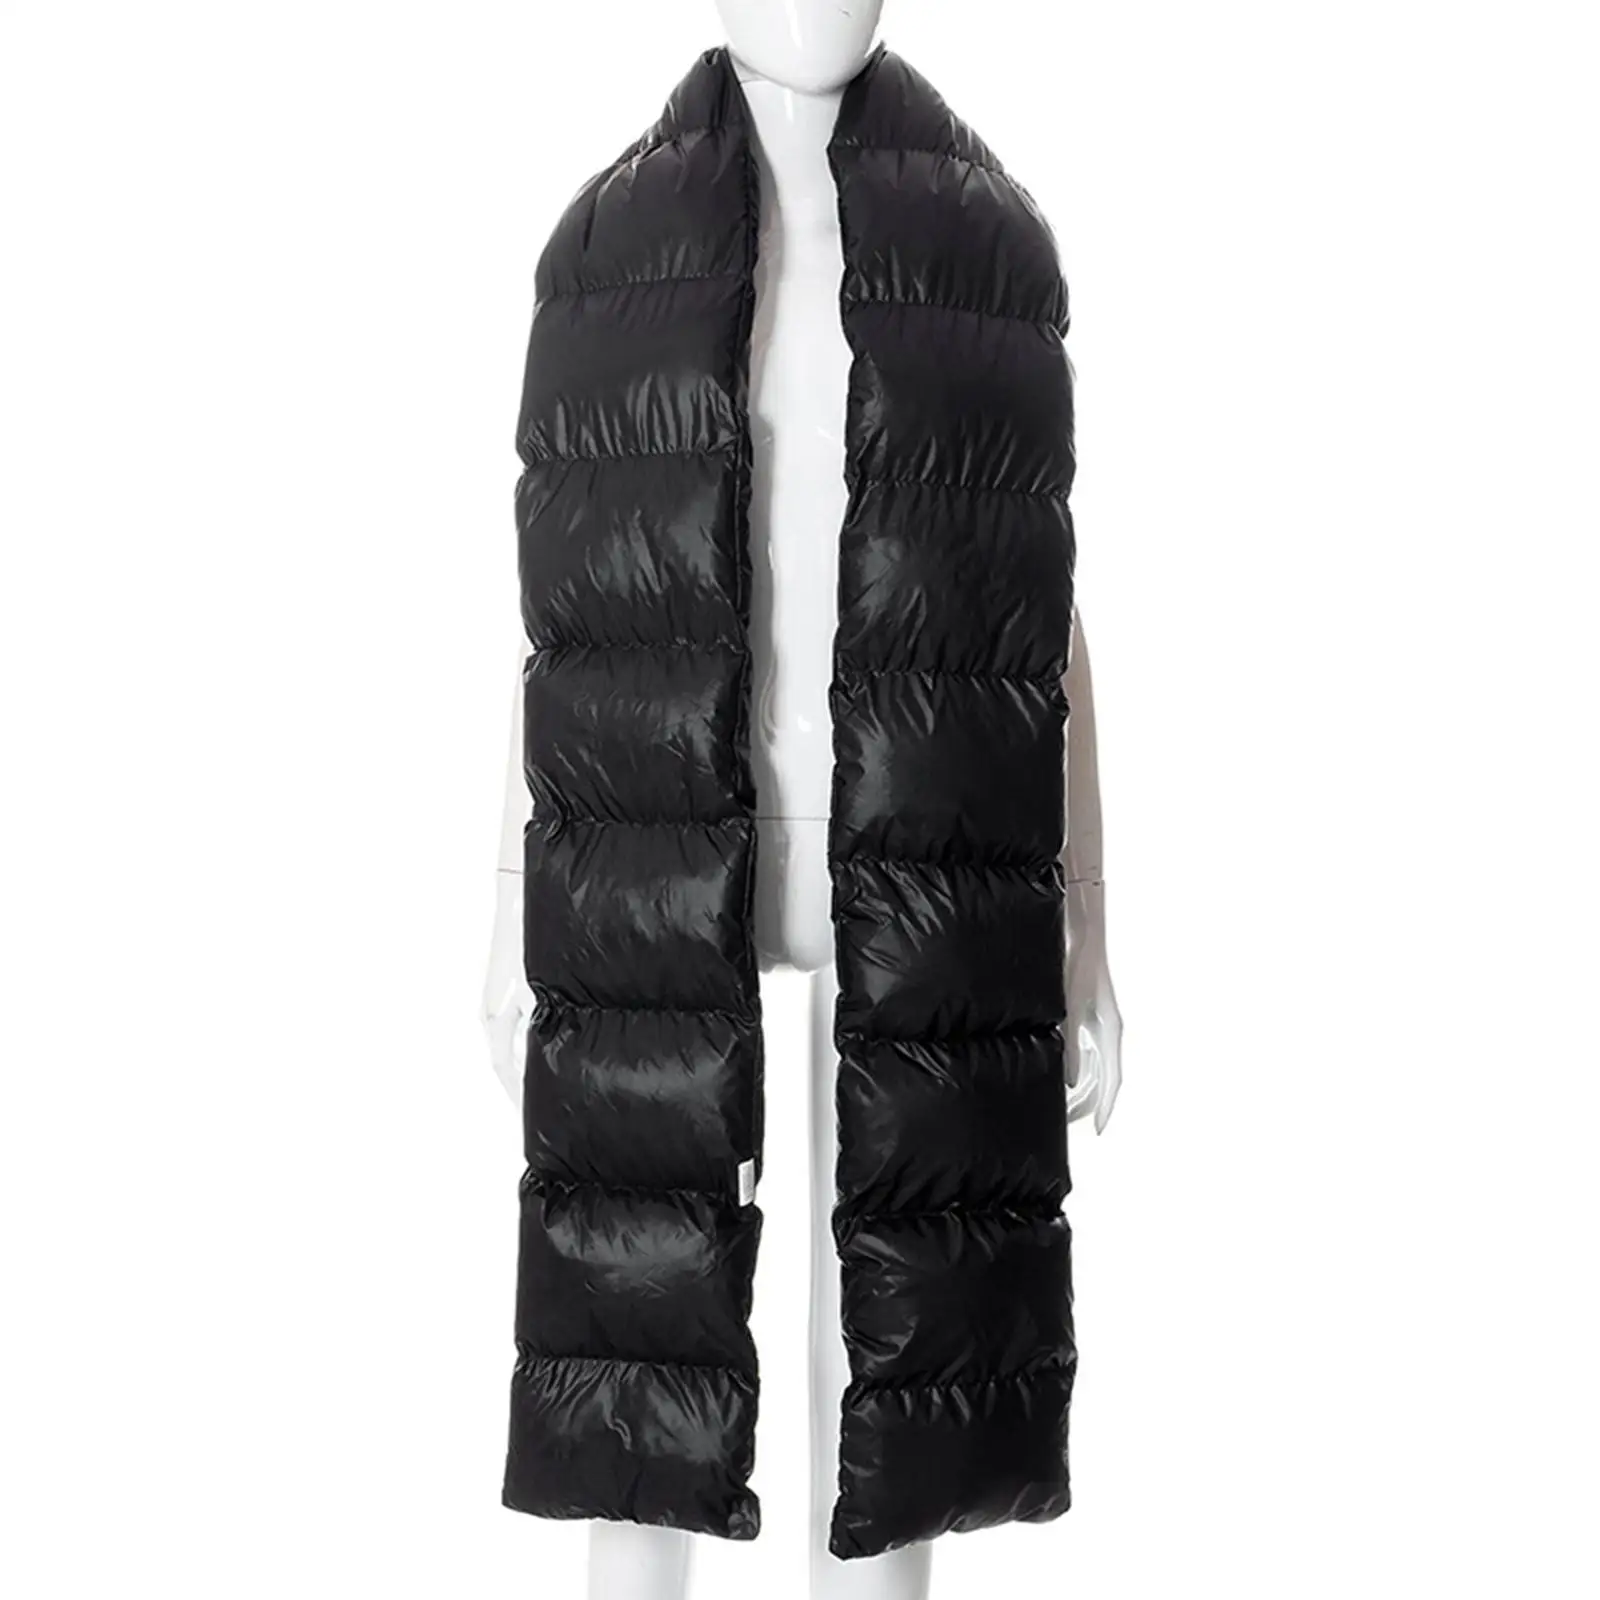 Women Winter Scarf Warm Scarves Wrap Shawl for Outdoor Activities Work Party